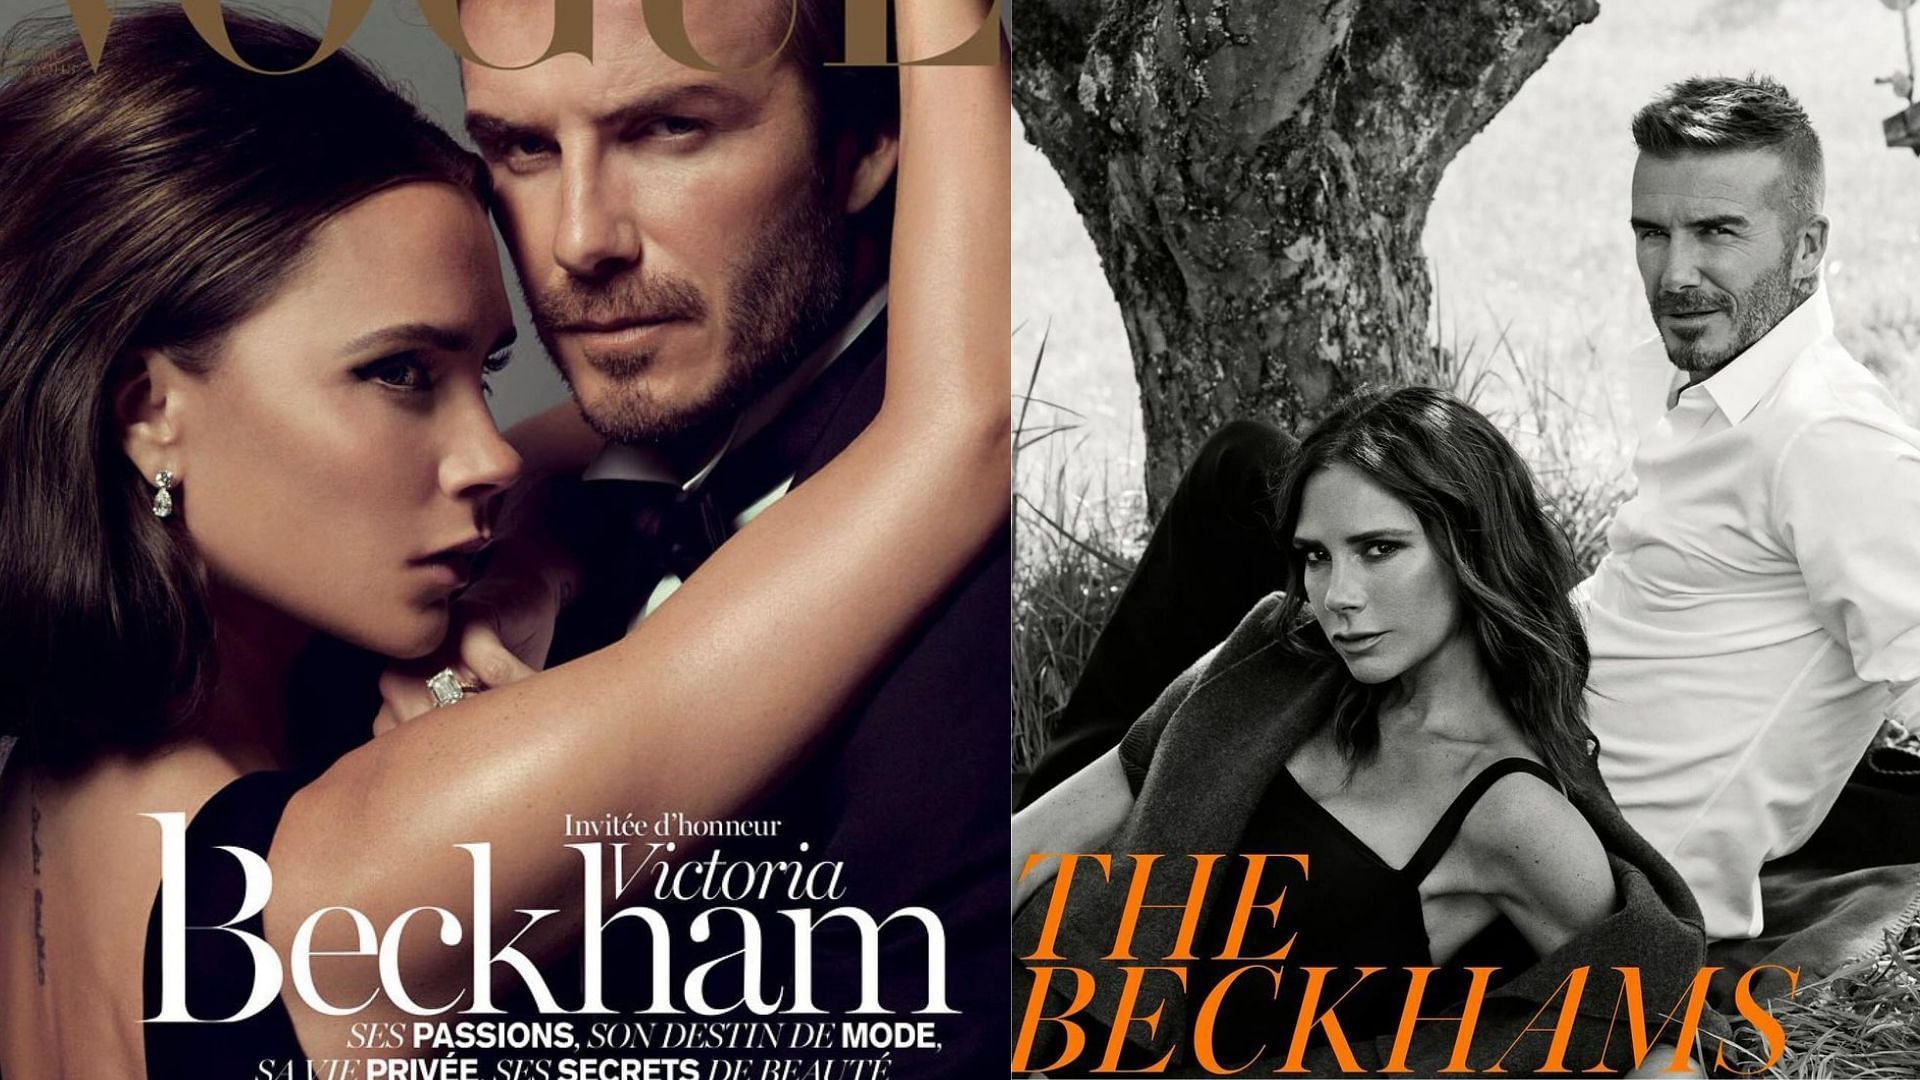 Fans swoon over Victoria and David Beckham&rsquo;s look in the magazine pictorial reminiscences post